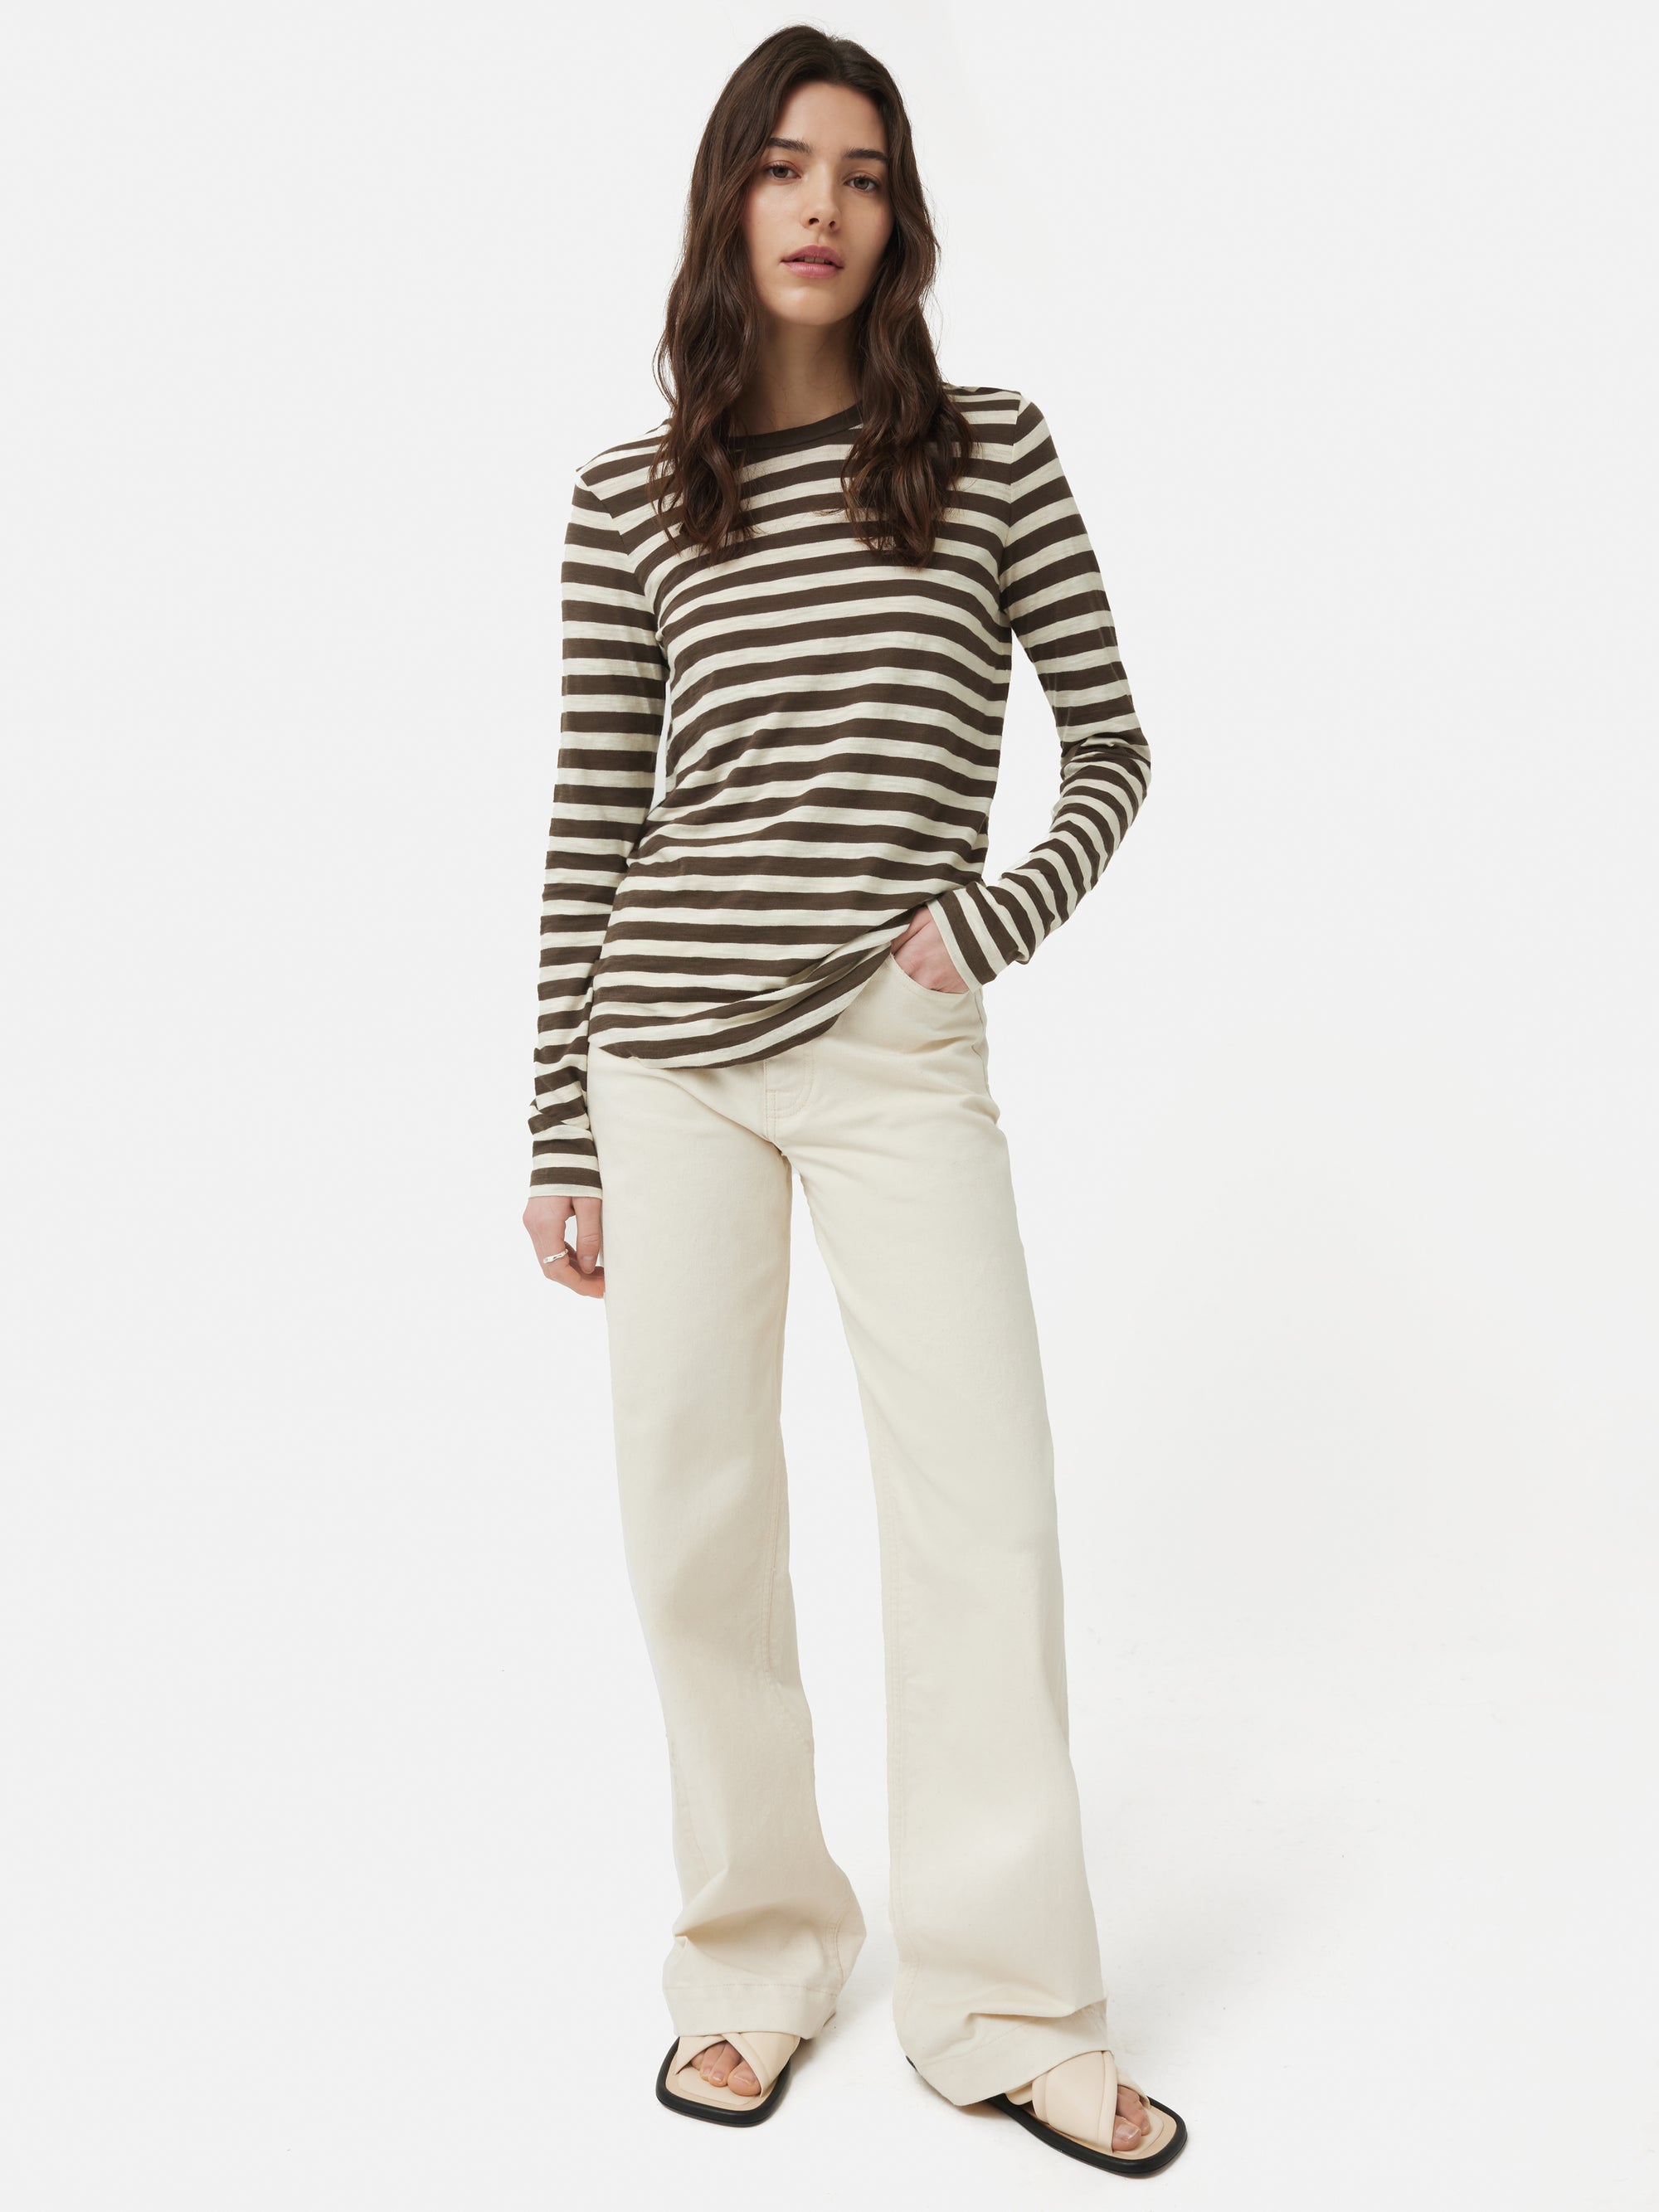 Marks and Spencer launches new Breton top for new season